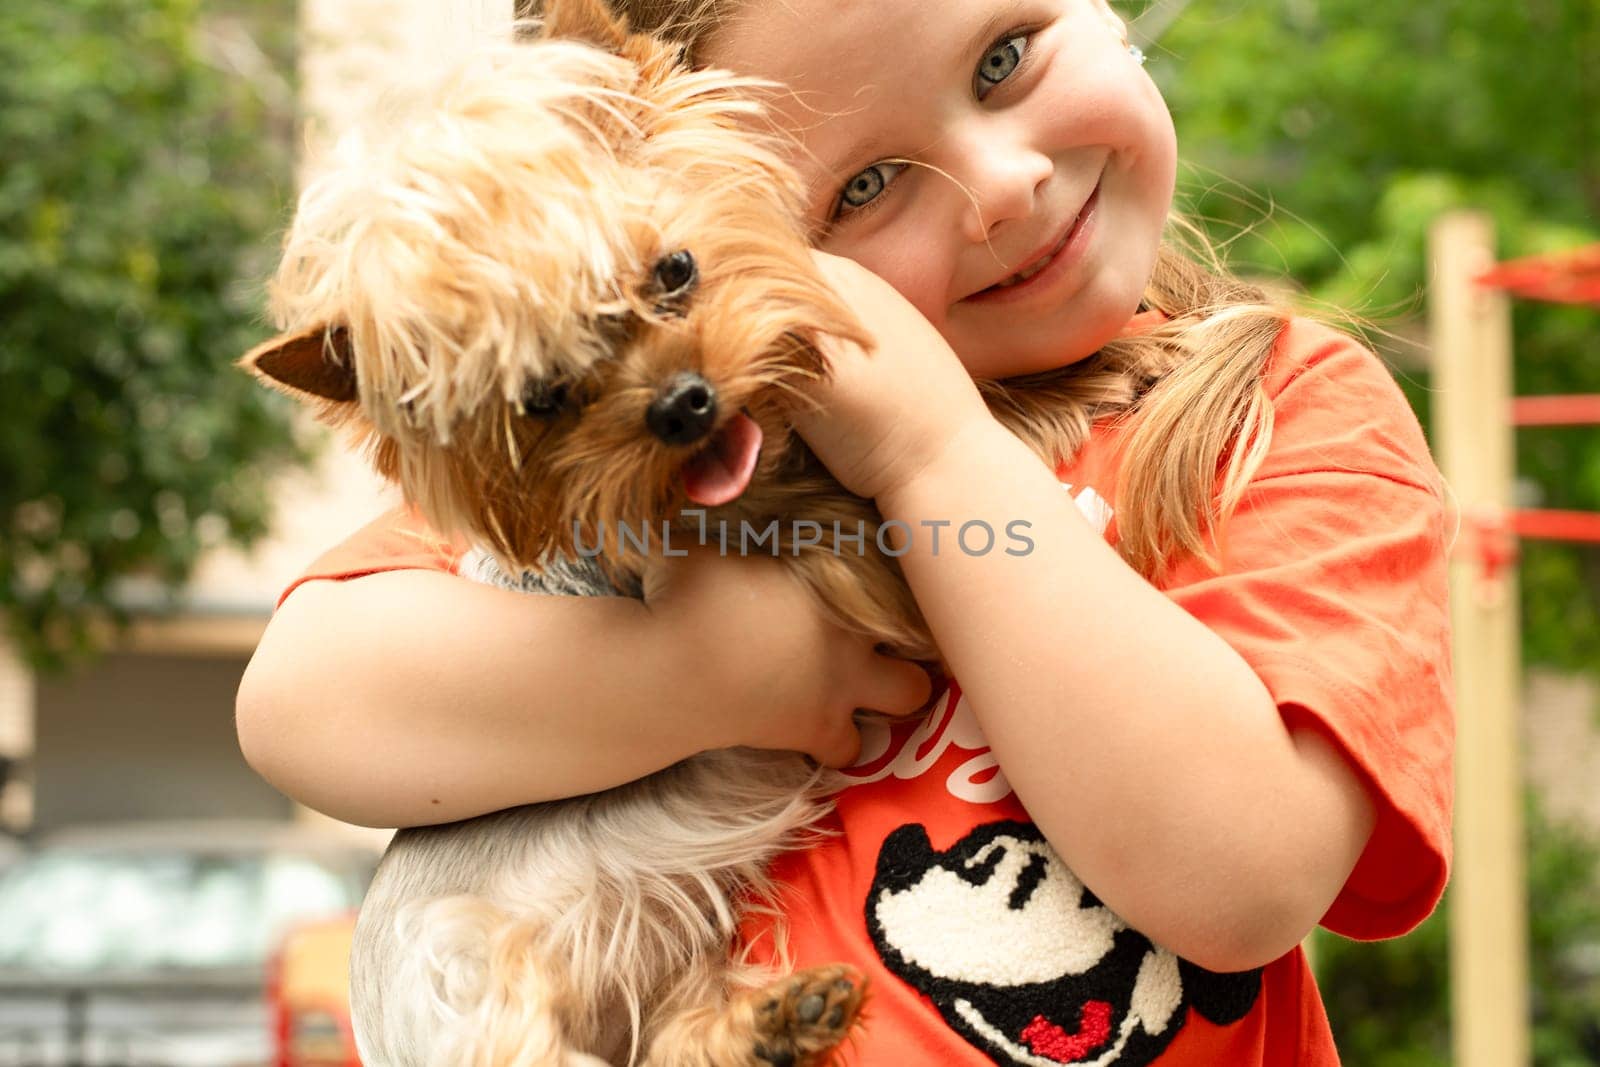 Child and dog on the street. A beautiful girl with blue eyes, 5 years old, holds a dwarf dog of the Chihuahua breed in her arms, smiles sweetly